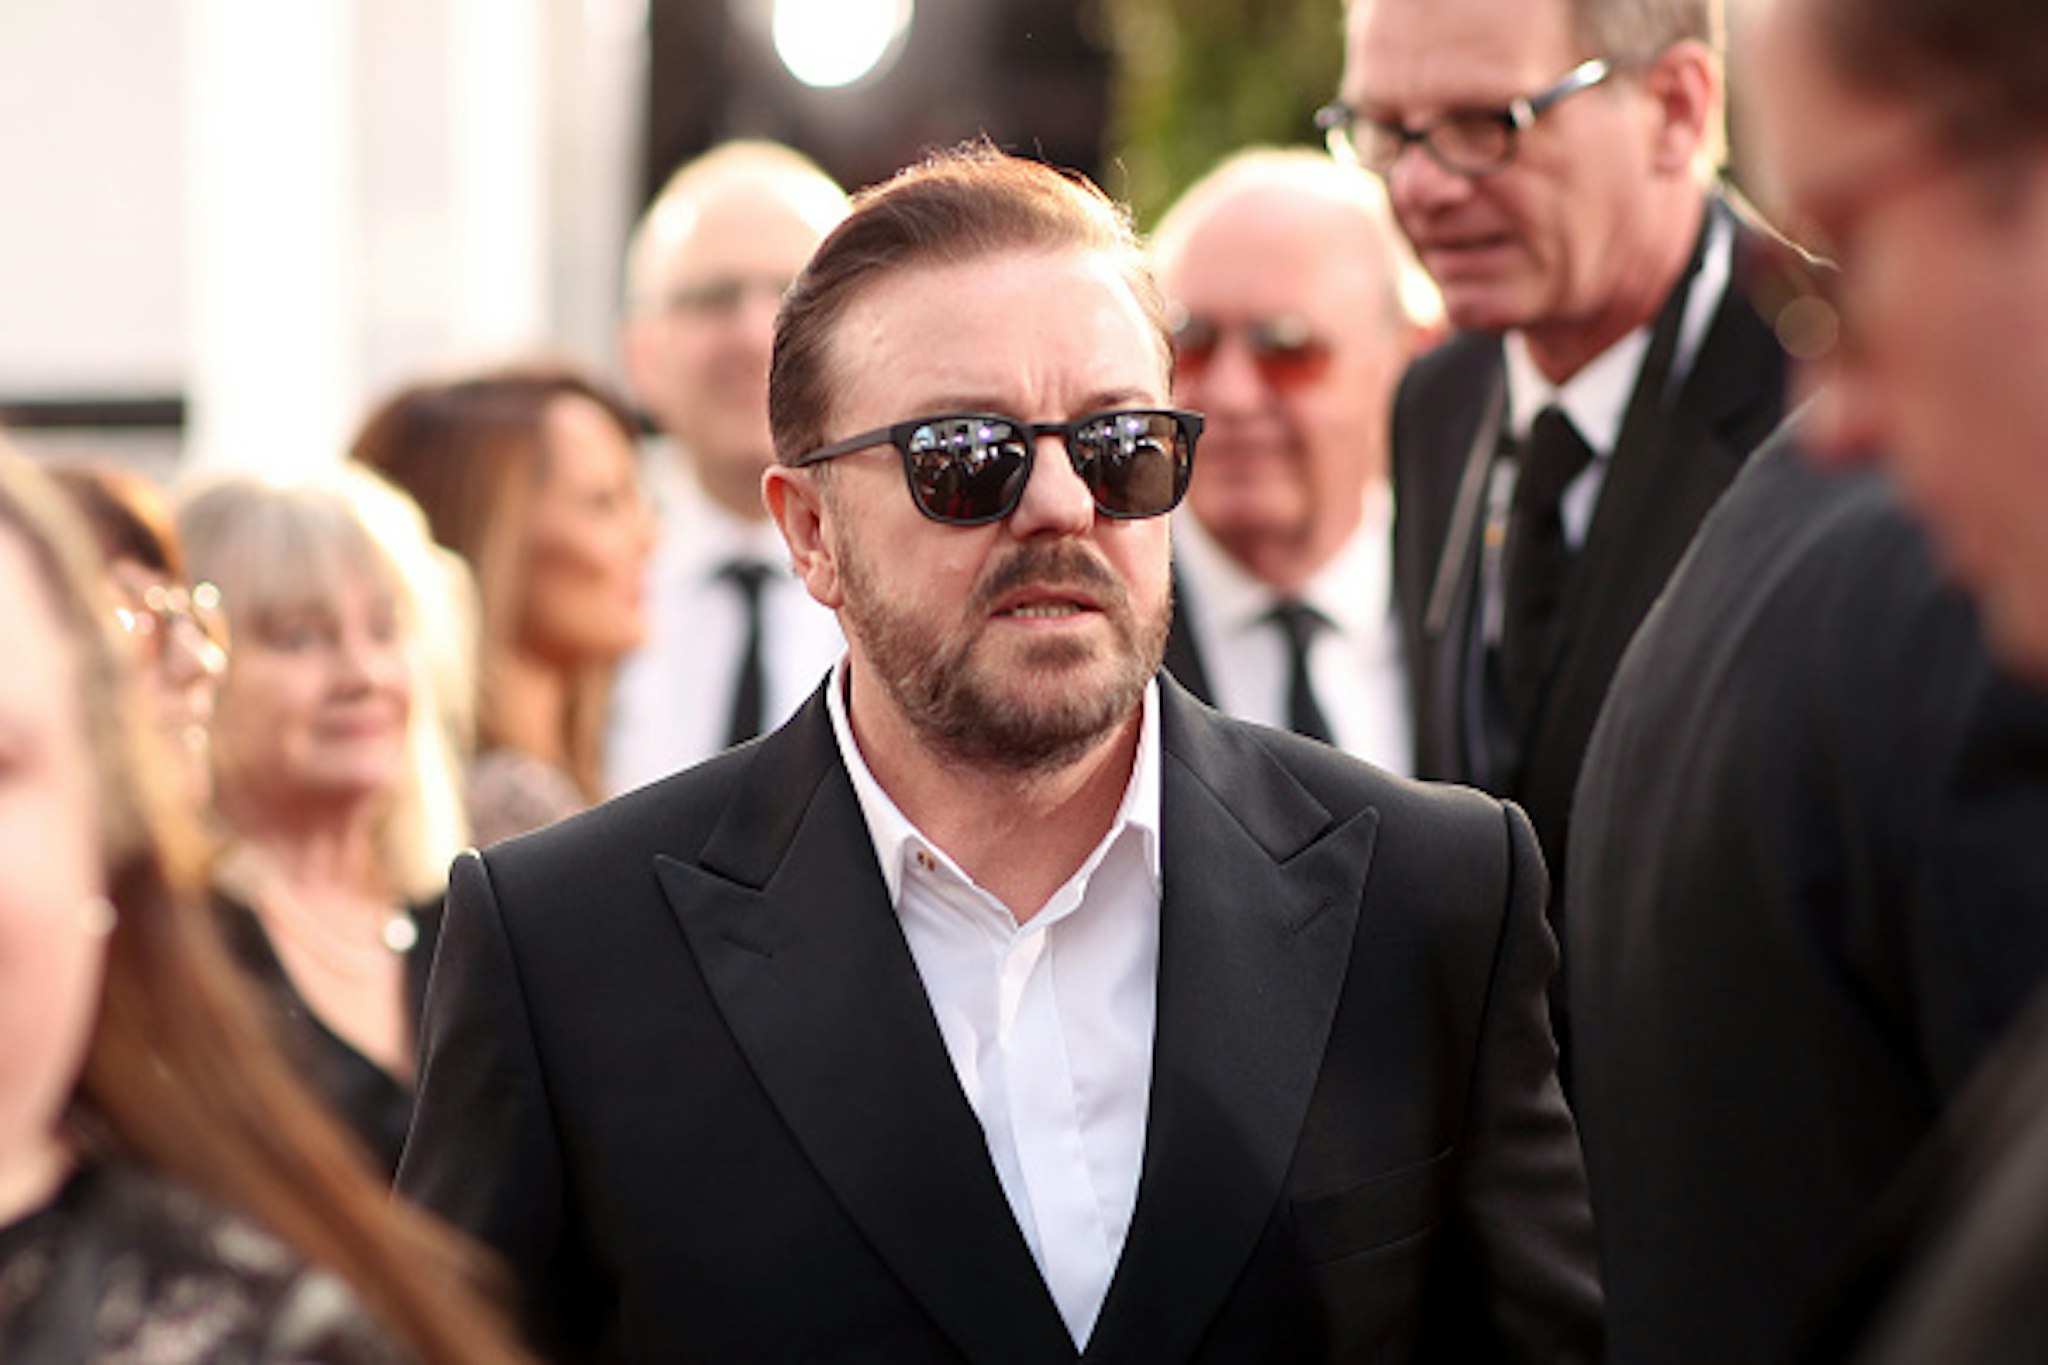 BEVERLY HILLS, CALIFORNIA - JANUARY 05: 77th ANNUAL GOLDEN GLOBE AWARDS -- Pictured: (l-r) Ricky Gervais arrives to the 77th Annual Golden Globe Awards held at the Beverly Hilton Hotel on January 5, 2020. --